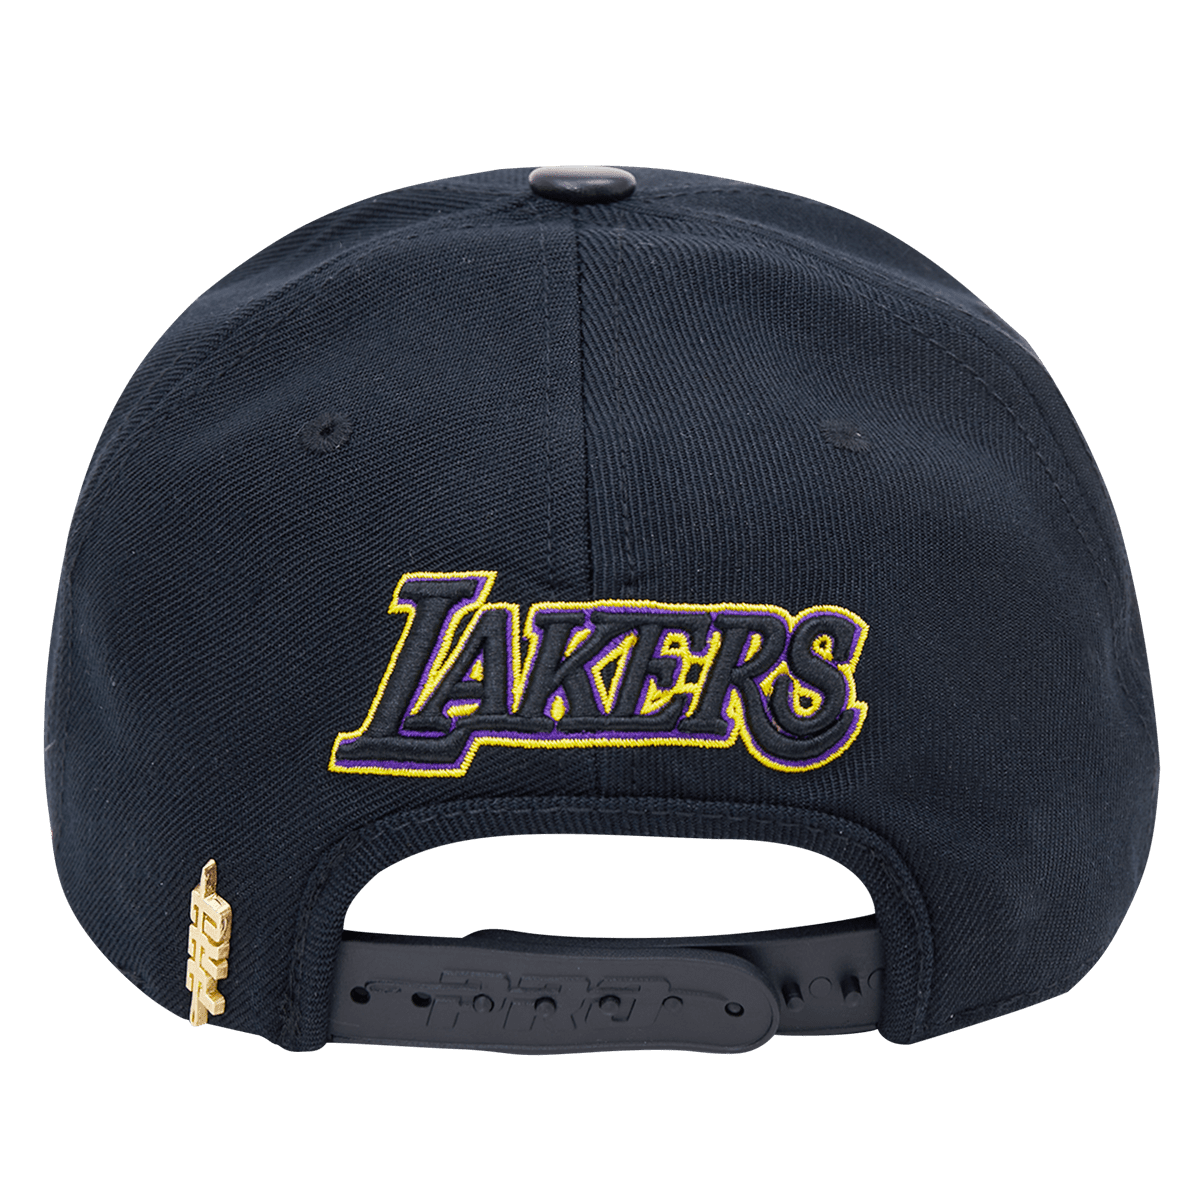 Buy the New Era black and gold cap from Los Angeles Lakers